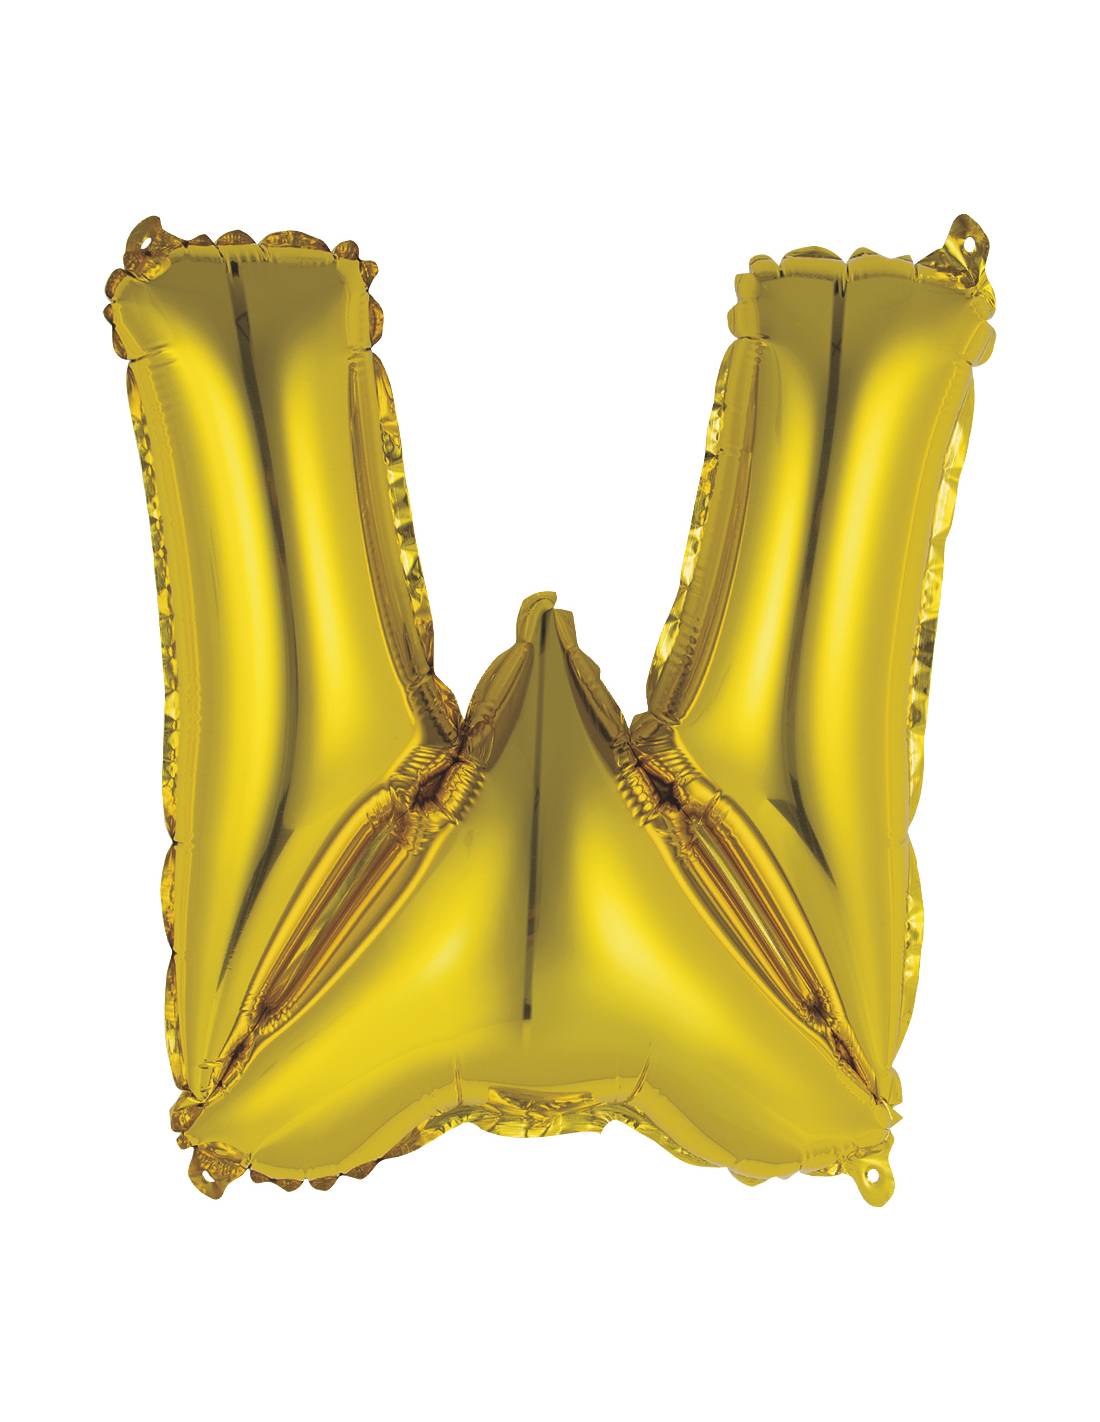 “W” Gold letter air filled balloon